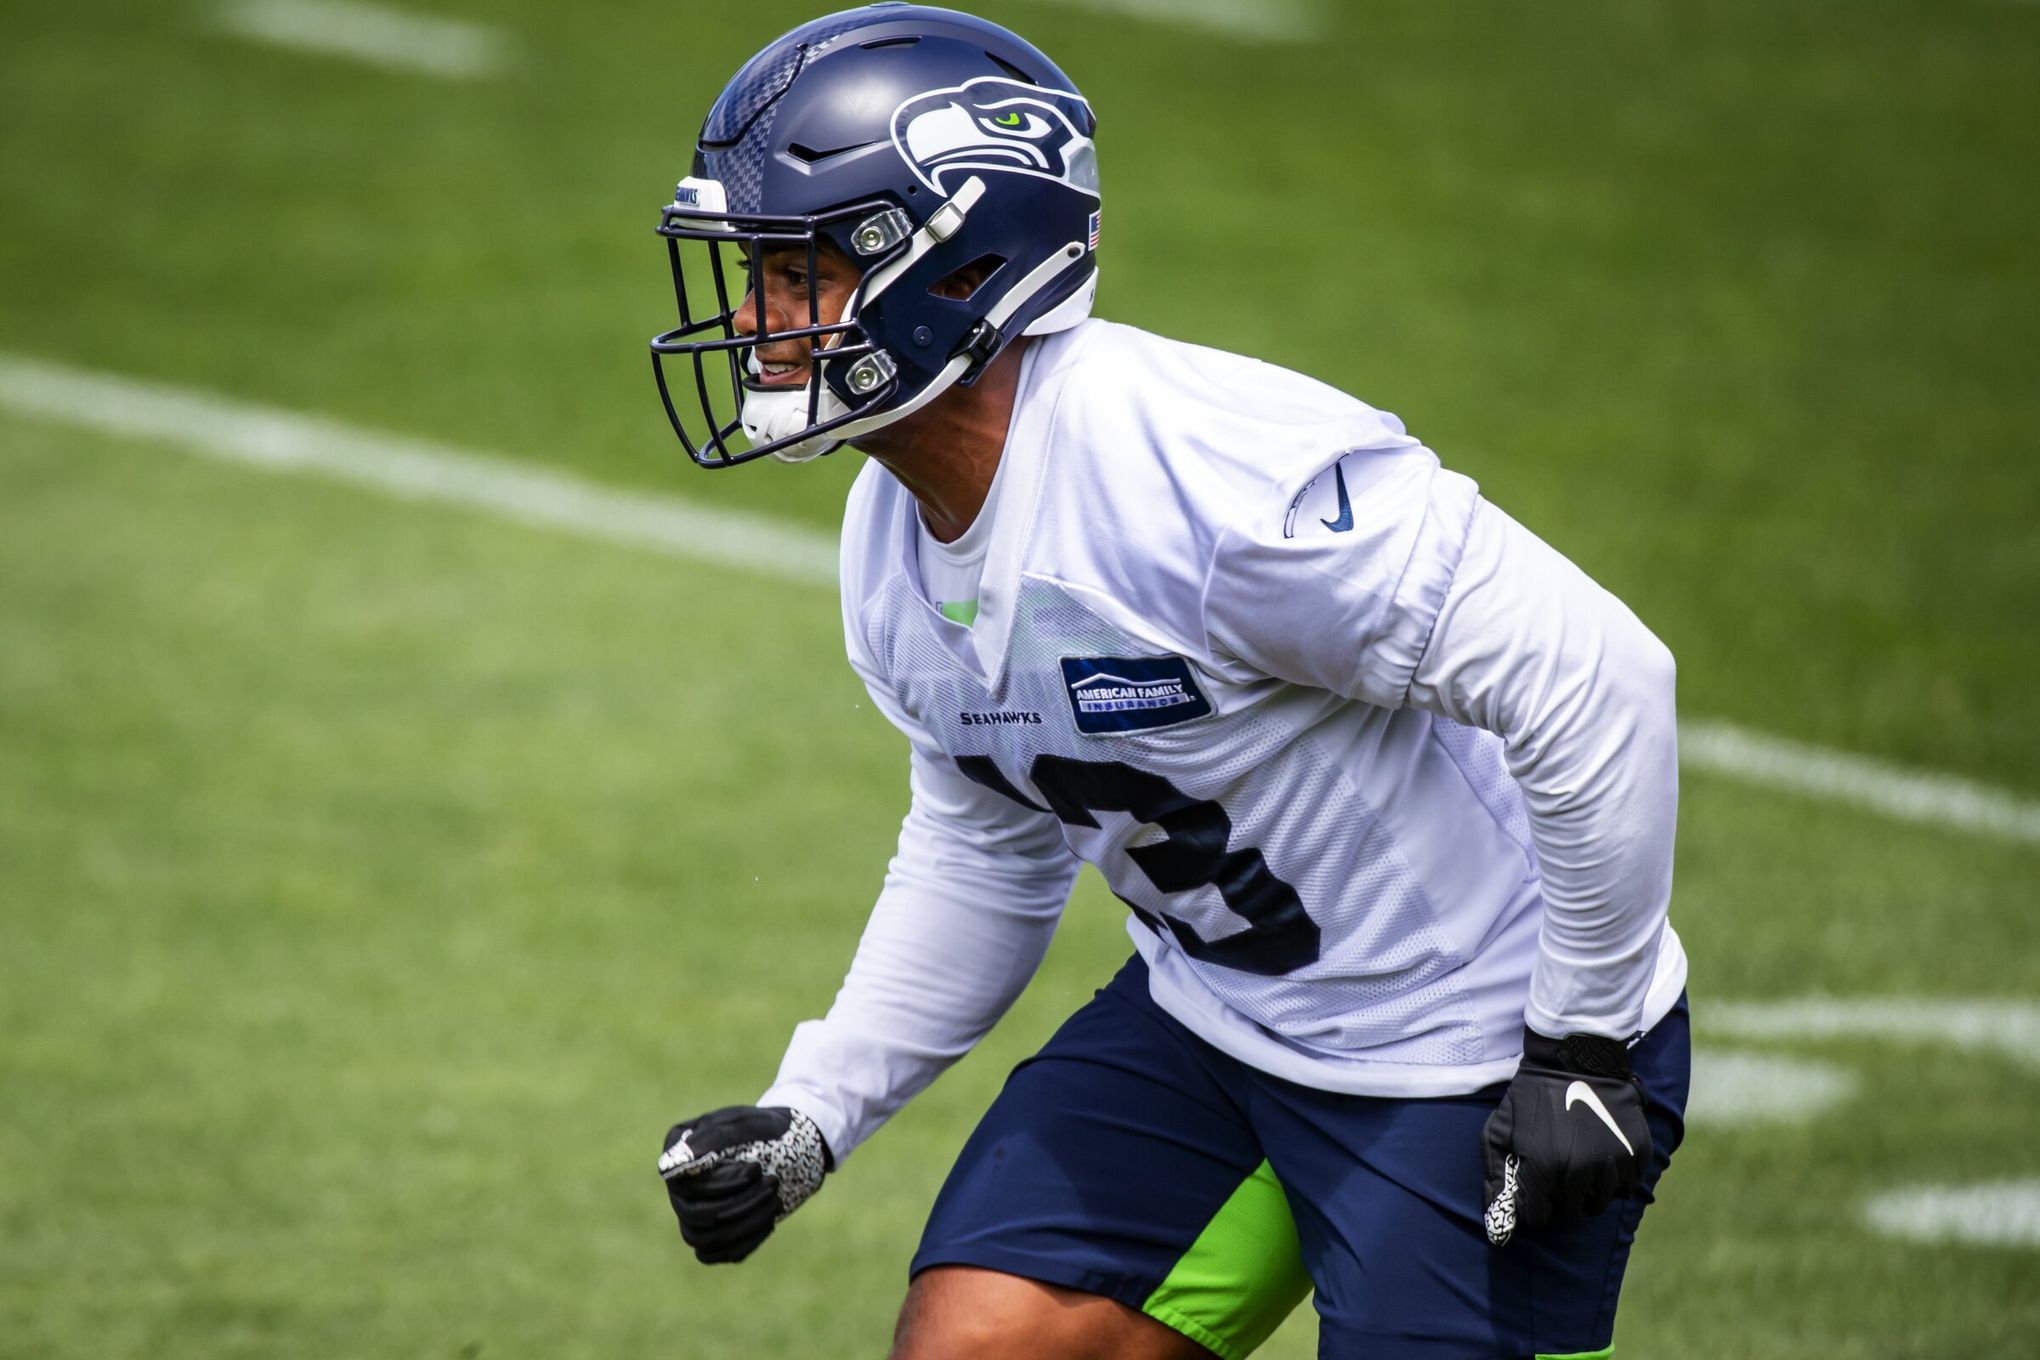 This German-born Seahawk is excited to welcome the NFL to his home